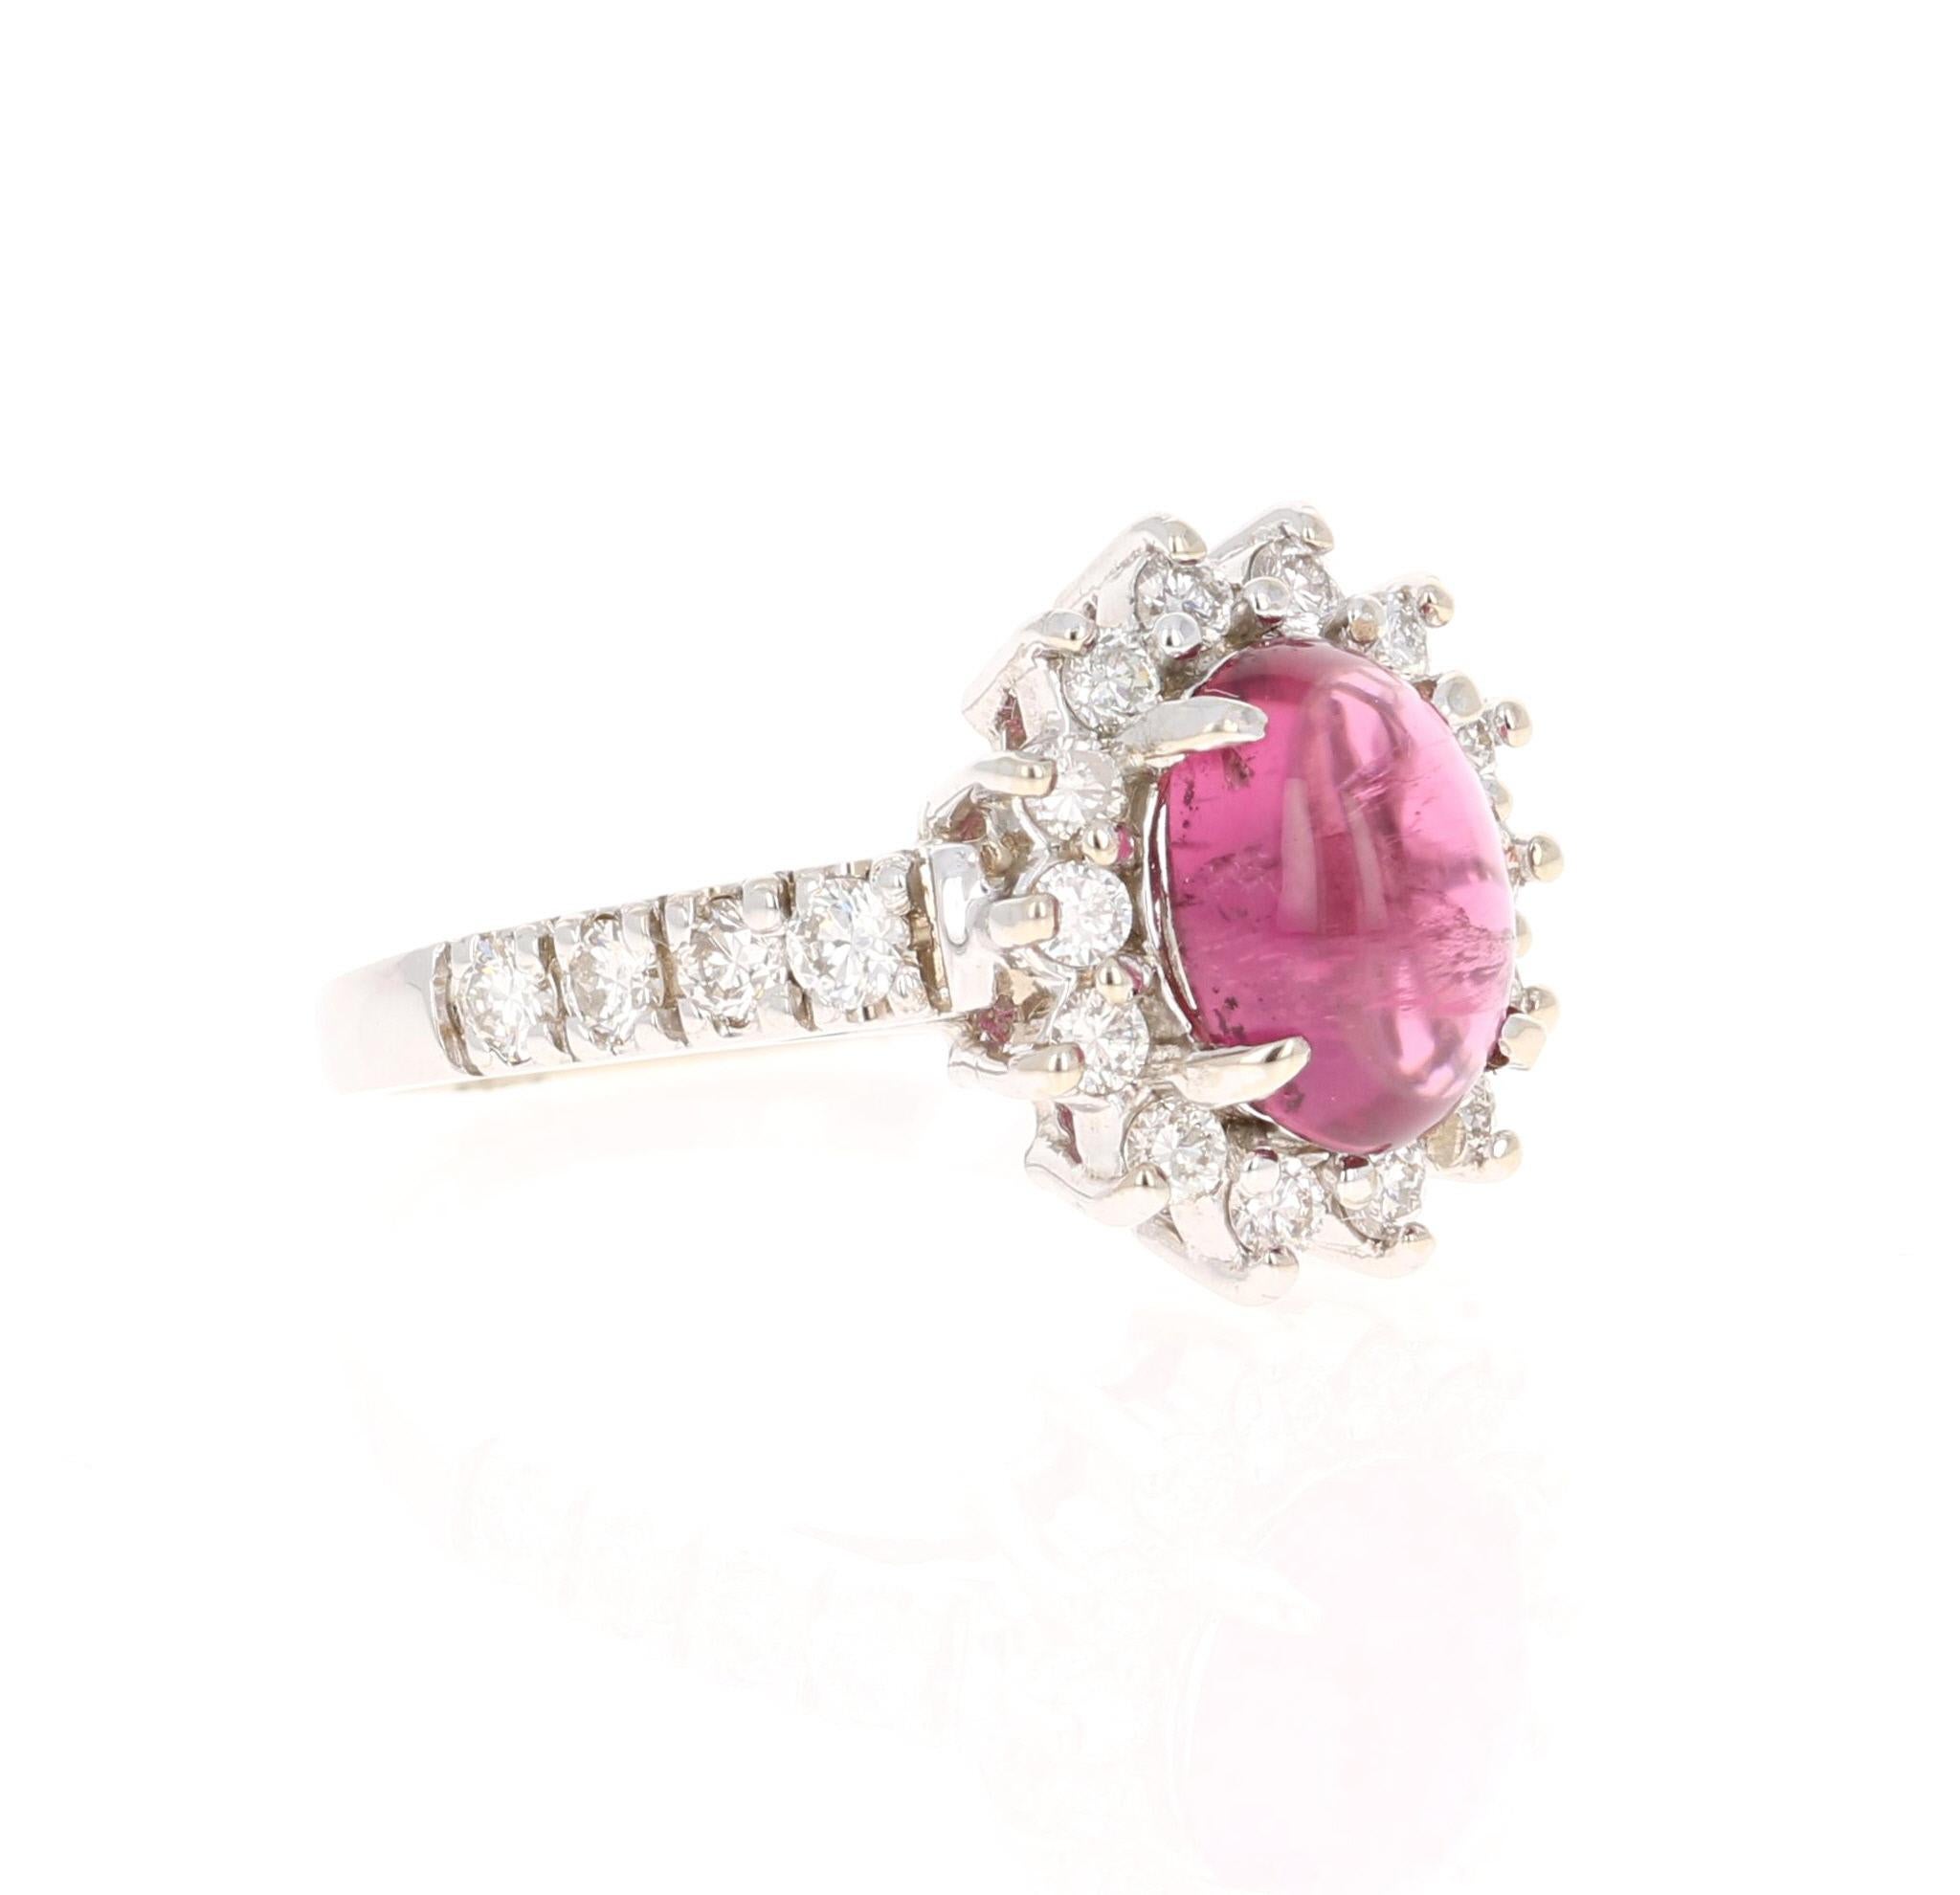 This ring has a Cabochon Oval Cut Pink Tourmaline that weighs 1.75 Carats. There are 22 Round Cut Diamonds that weigh 0.62 Carats. (Clarity: VS2, Color: H).  The total carat weight of the ring is 2.37 Carats. The measurements of the Tourmaline are